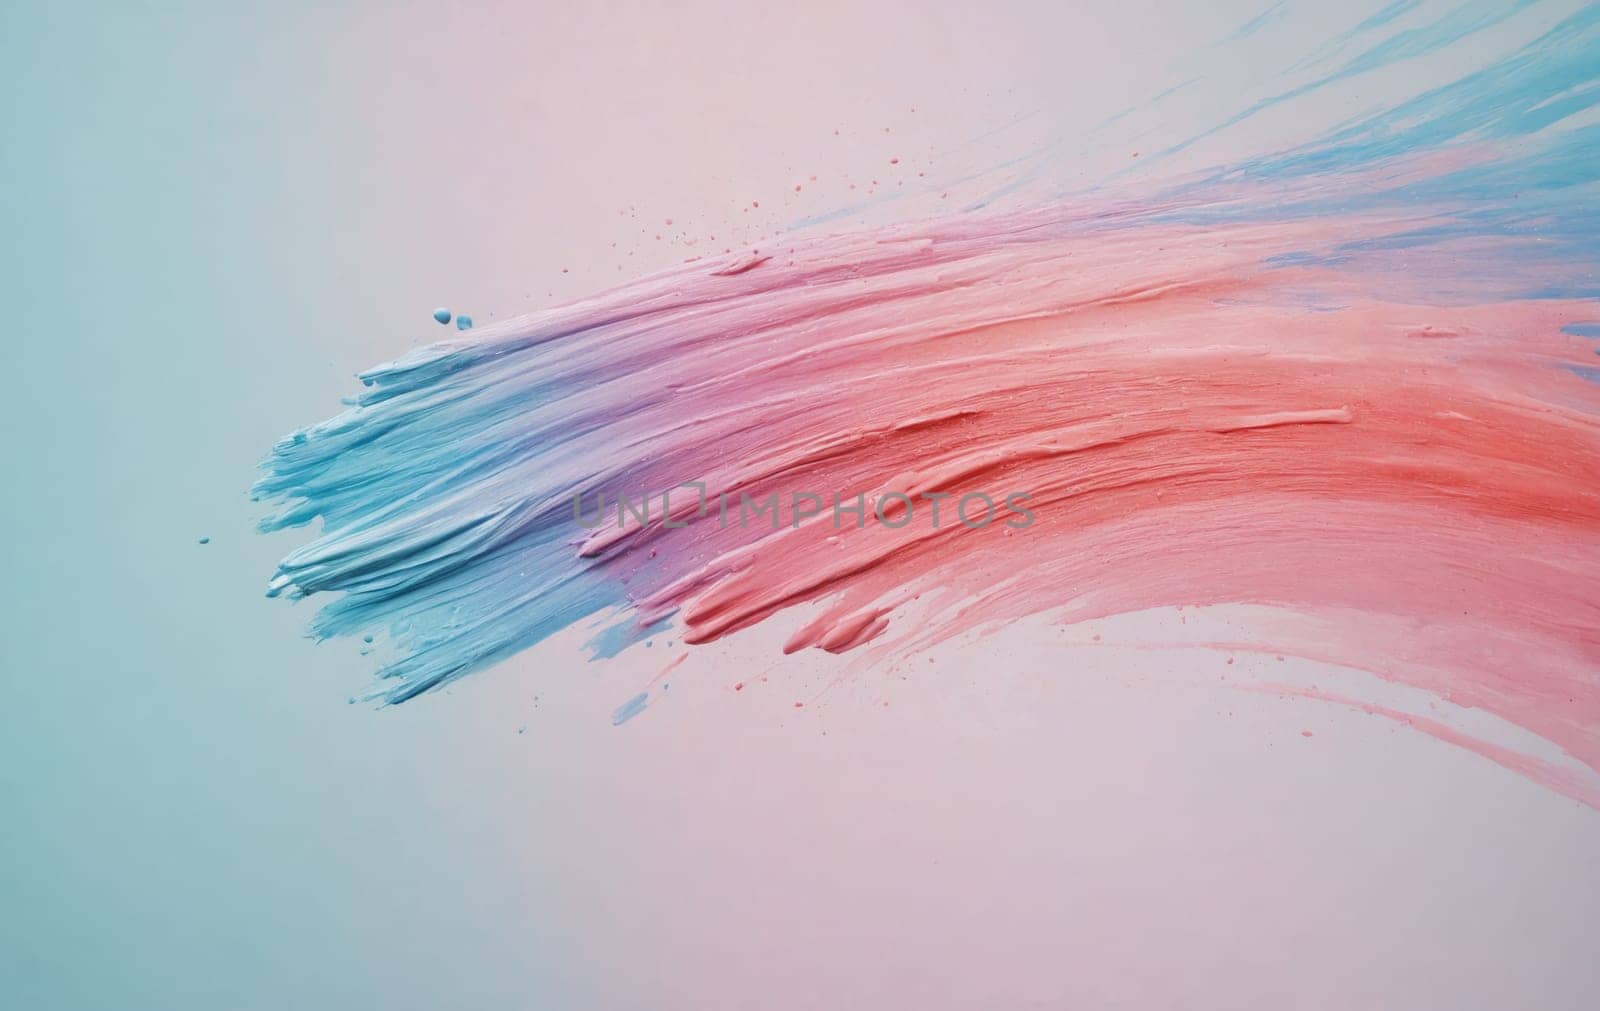 Thick lines of pink, turquoise, and blue paint spread and drip across the canvas, creating a dynamic artistic effect.